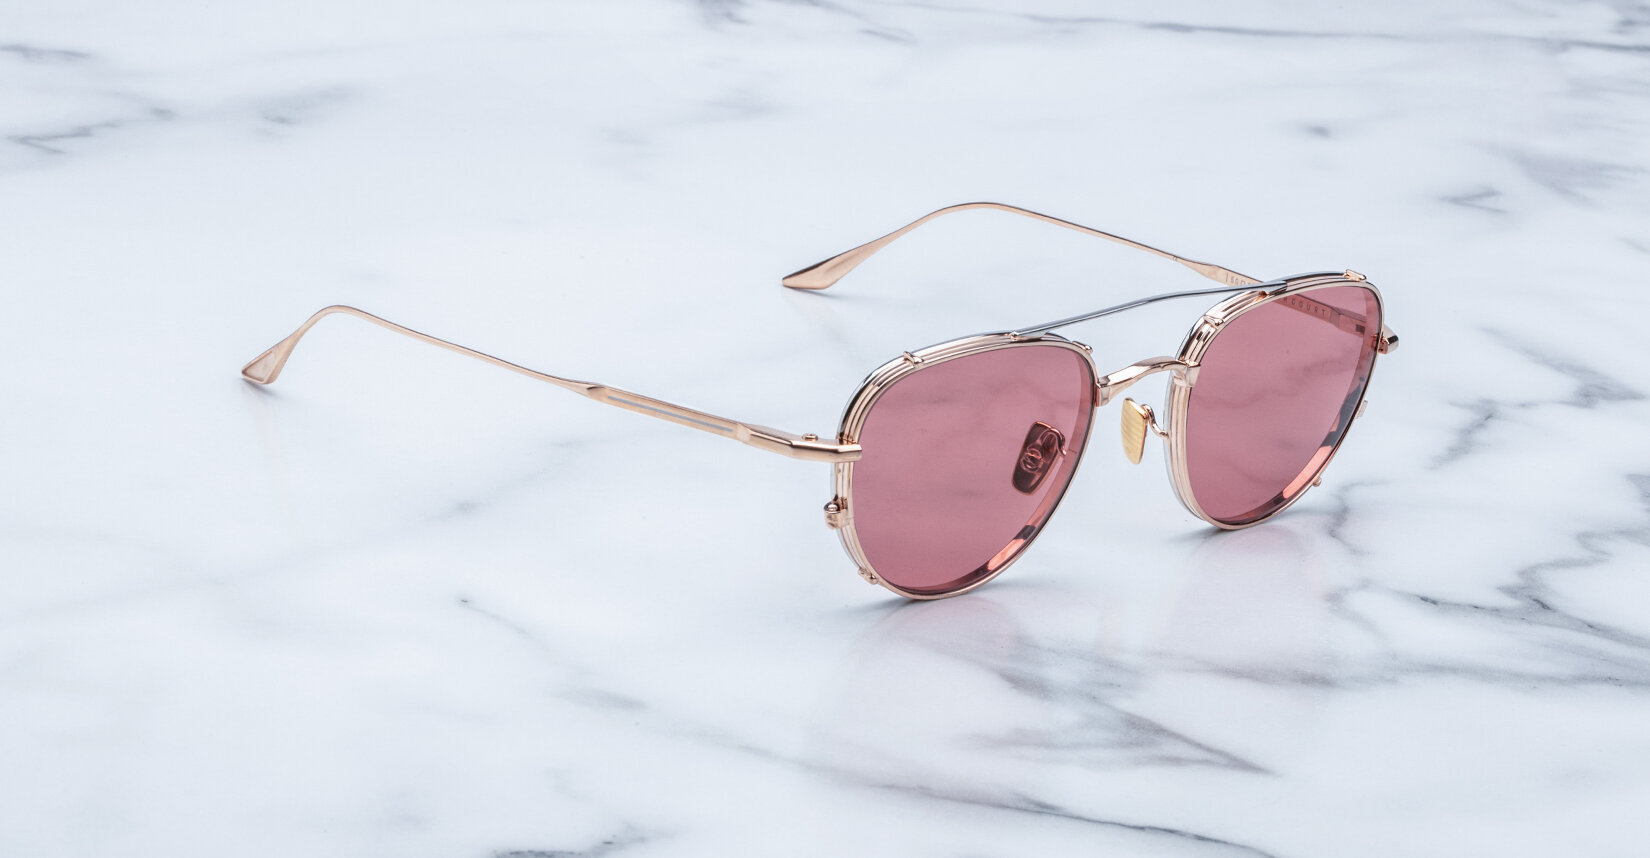 atelier mira-HARCOURT optical boutique featuring handcrafted eyewear ...